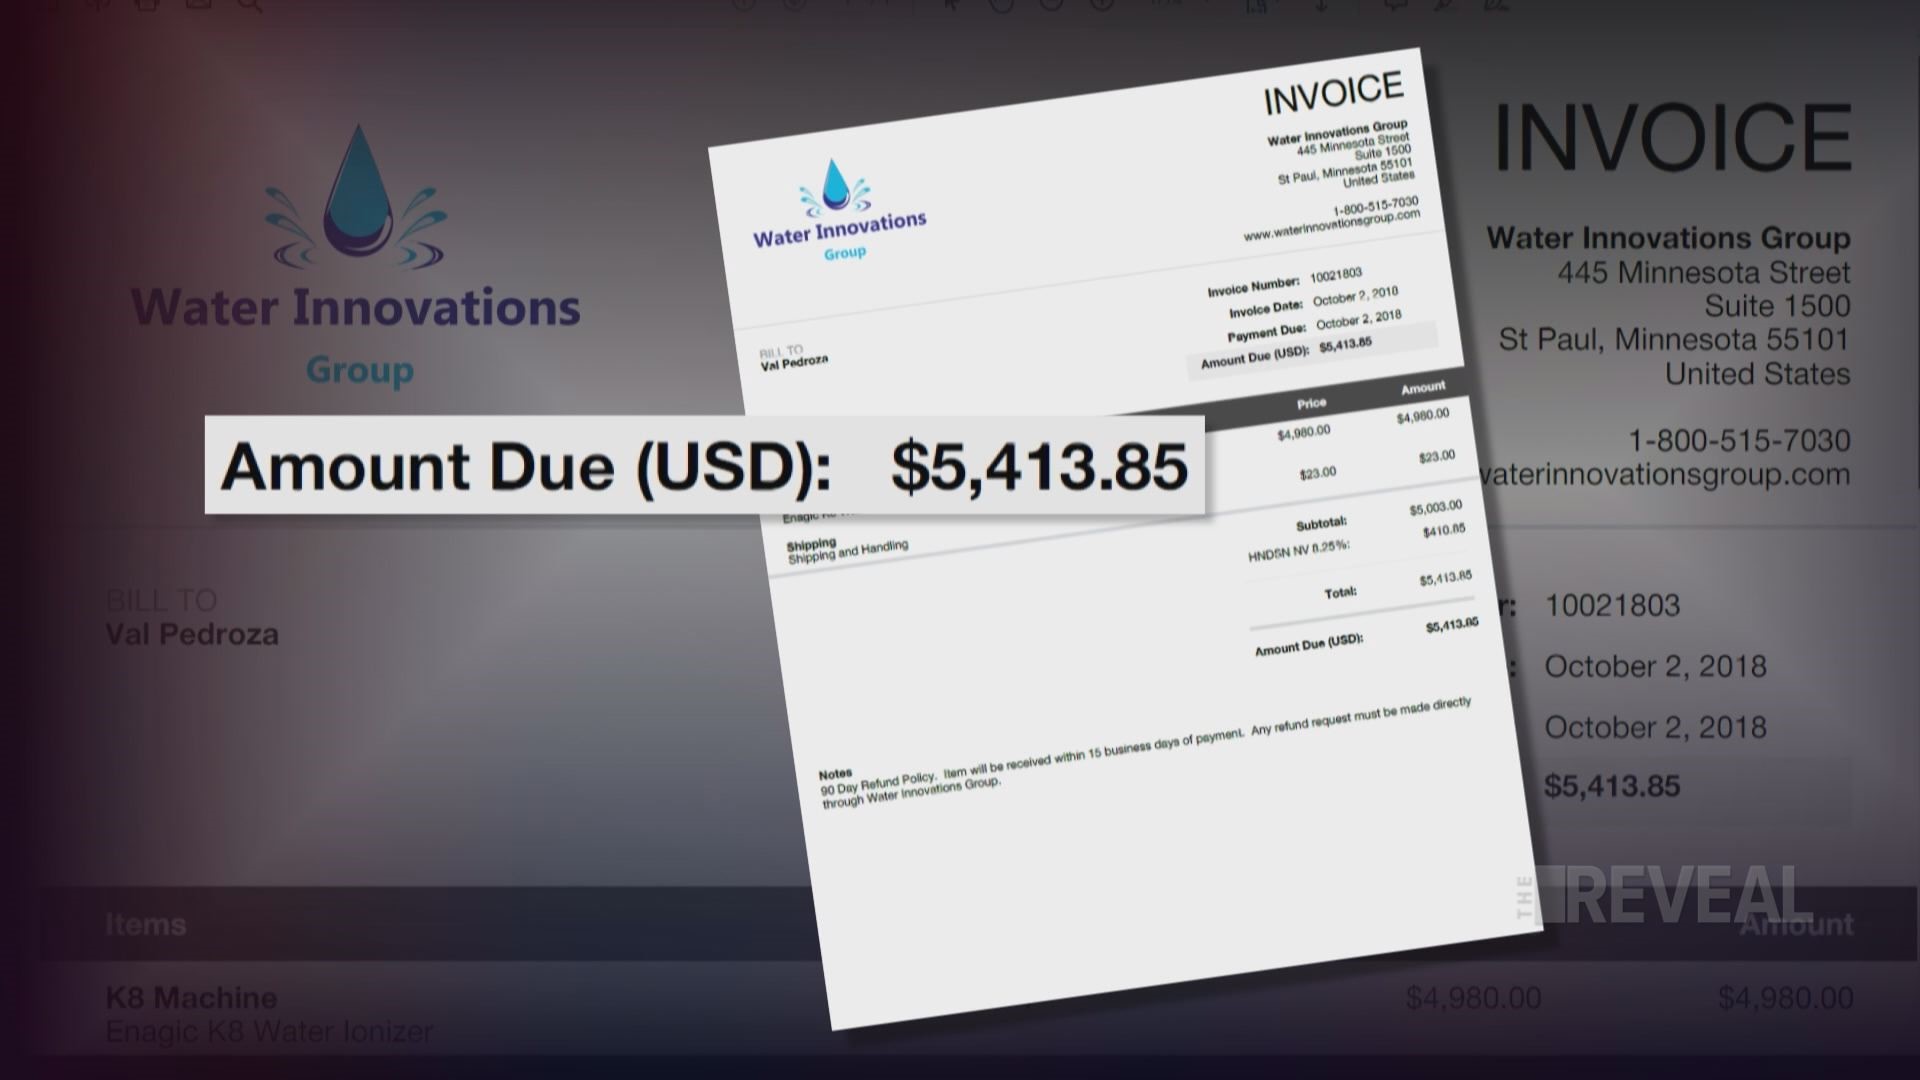 People from coast to coast claim Watertek owes them thousands of dollars after failing to deliver promised jobs and expensive in-home water equipment.